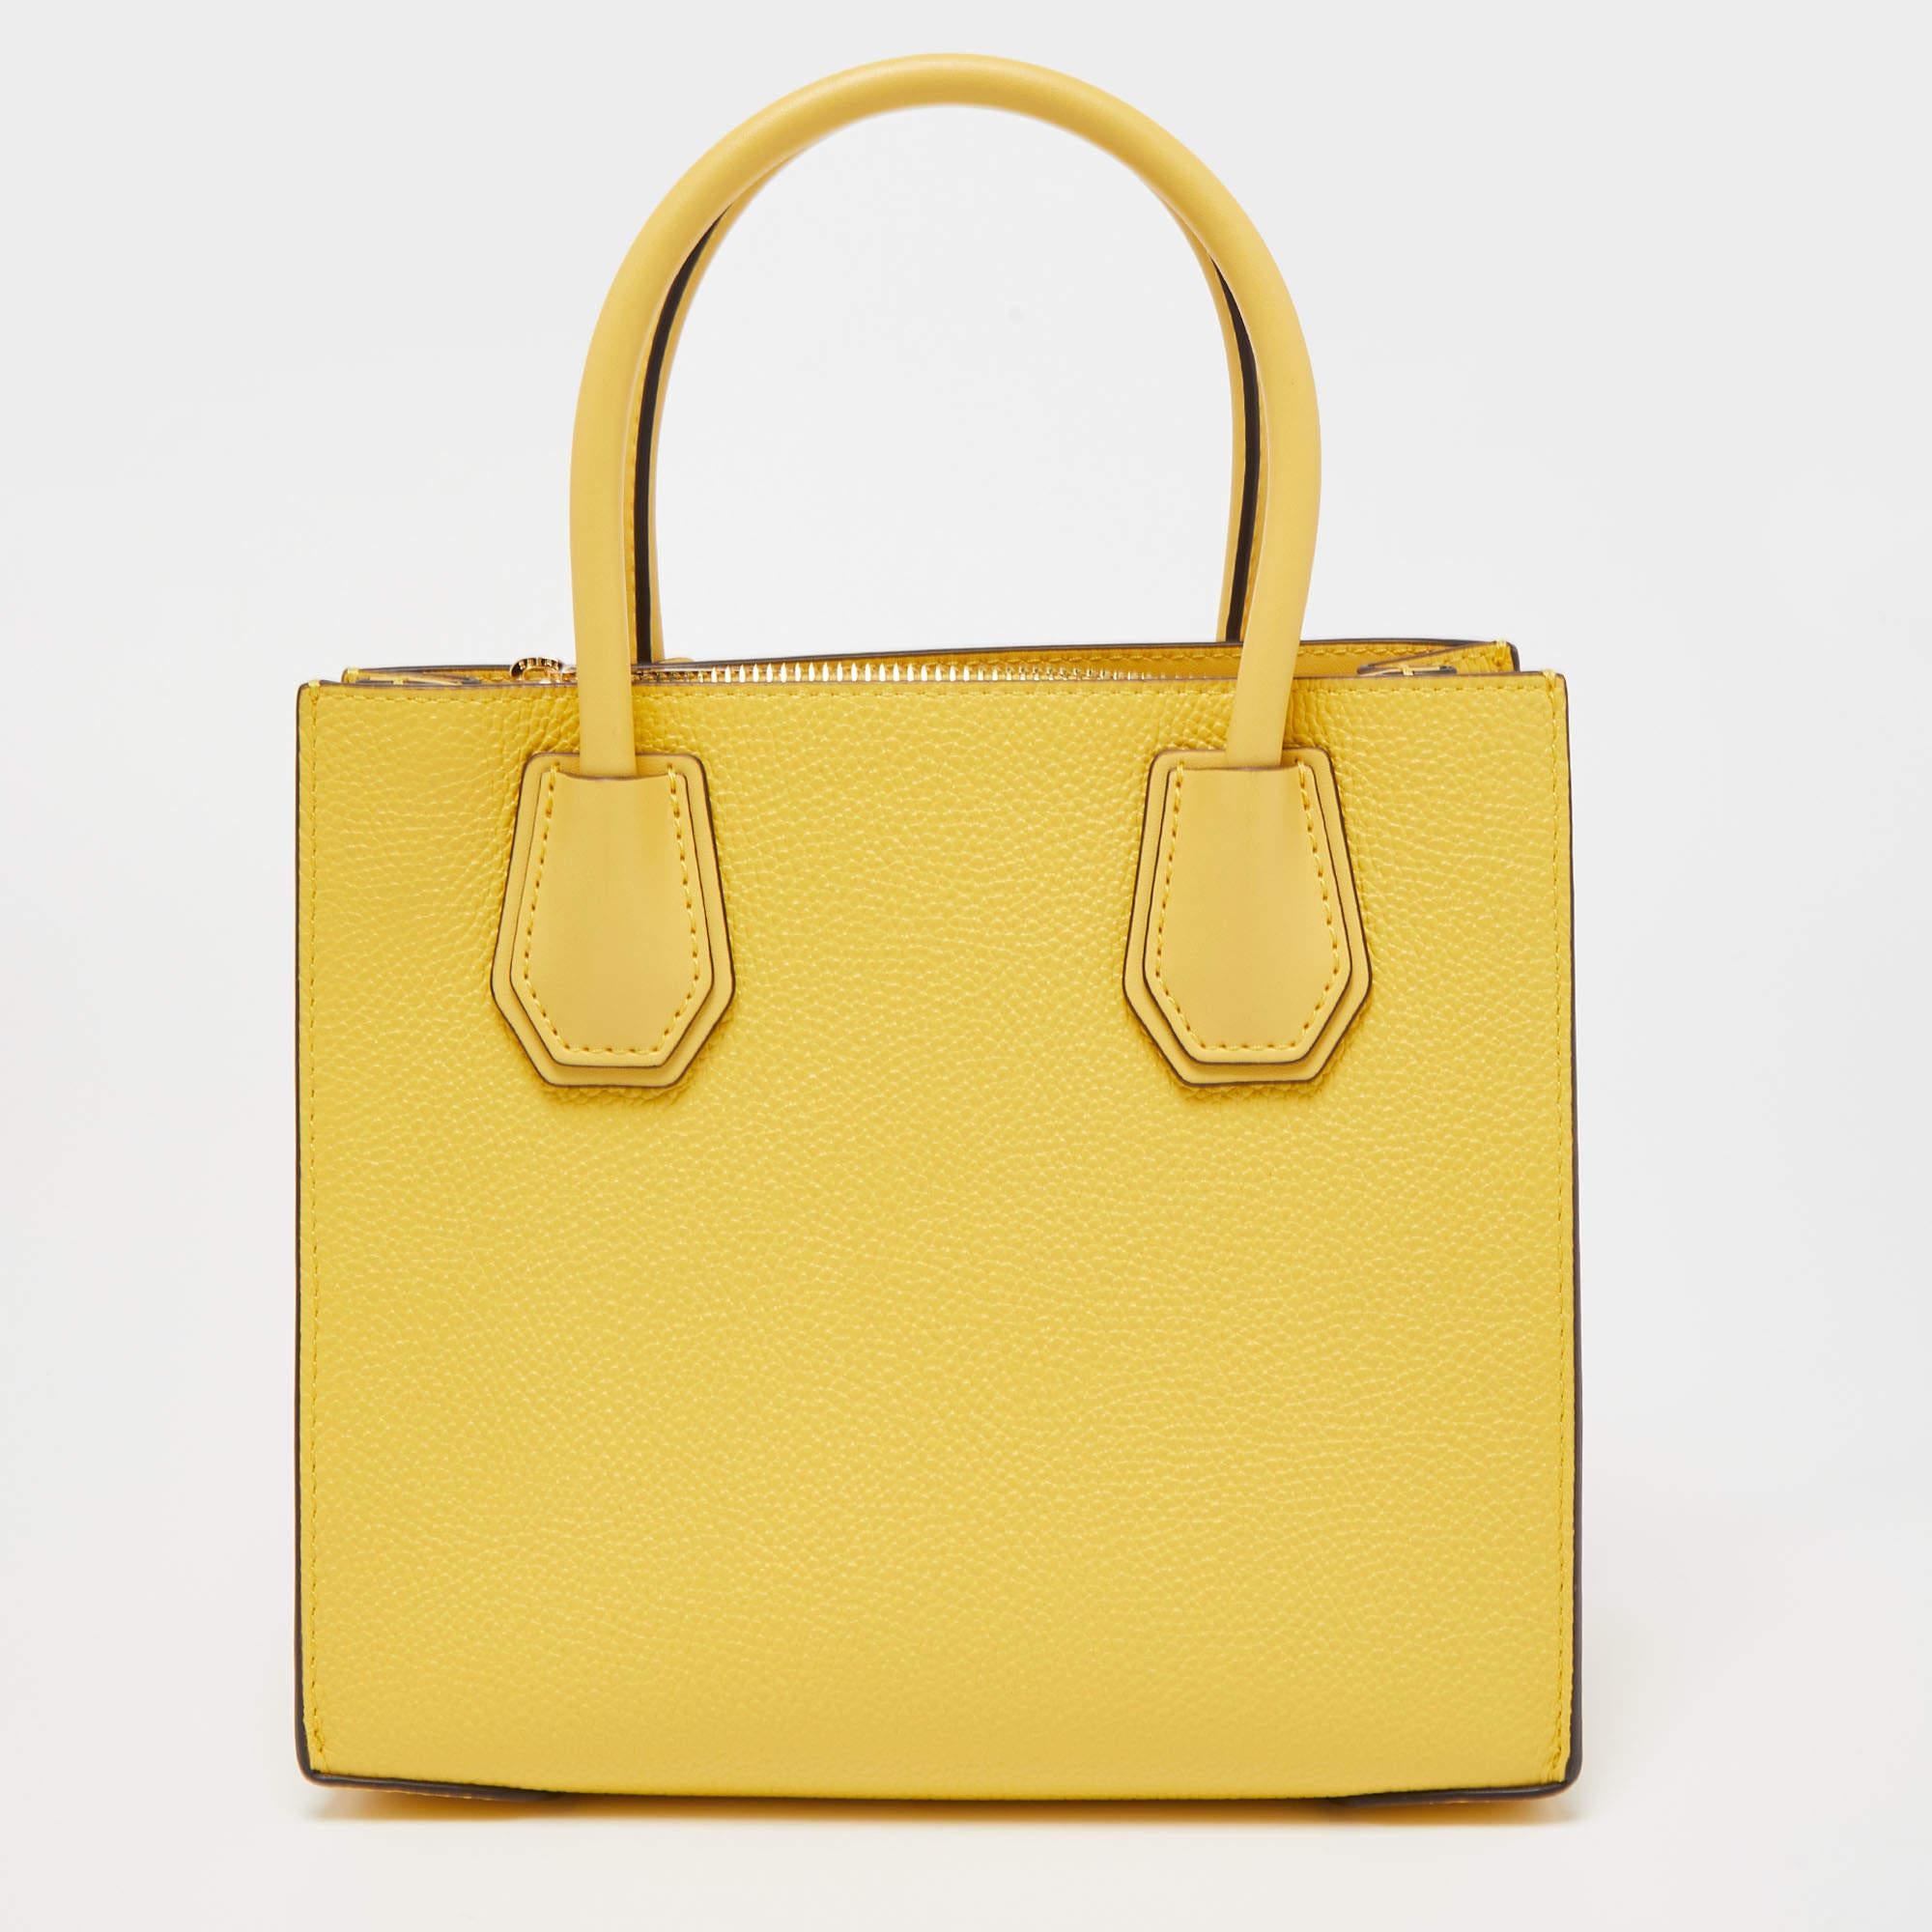 Women's Michael Kors Yellow Leather Mercer Tote For Sale